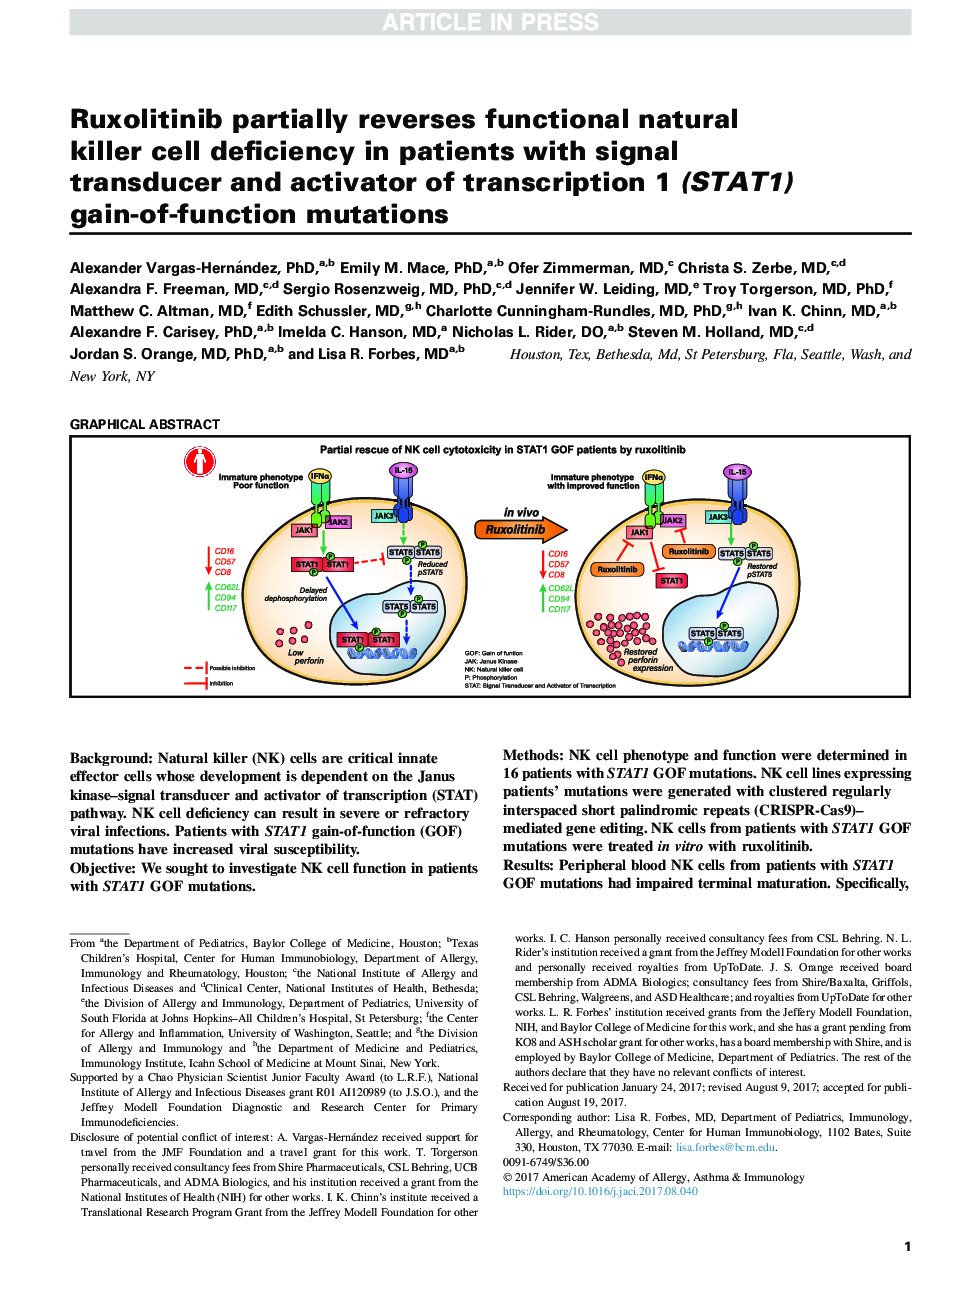 Ruxolitinib partially reverses functional natural killer cell deficiency in patients with signal transducer and activator of transcription 1 (STAT1) gain-of-function mutations